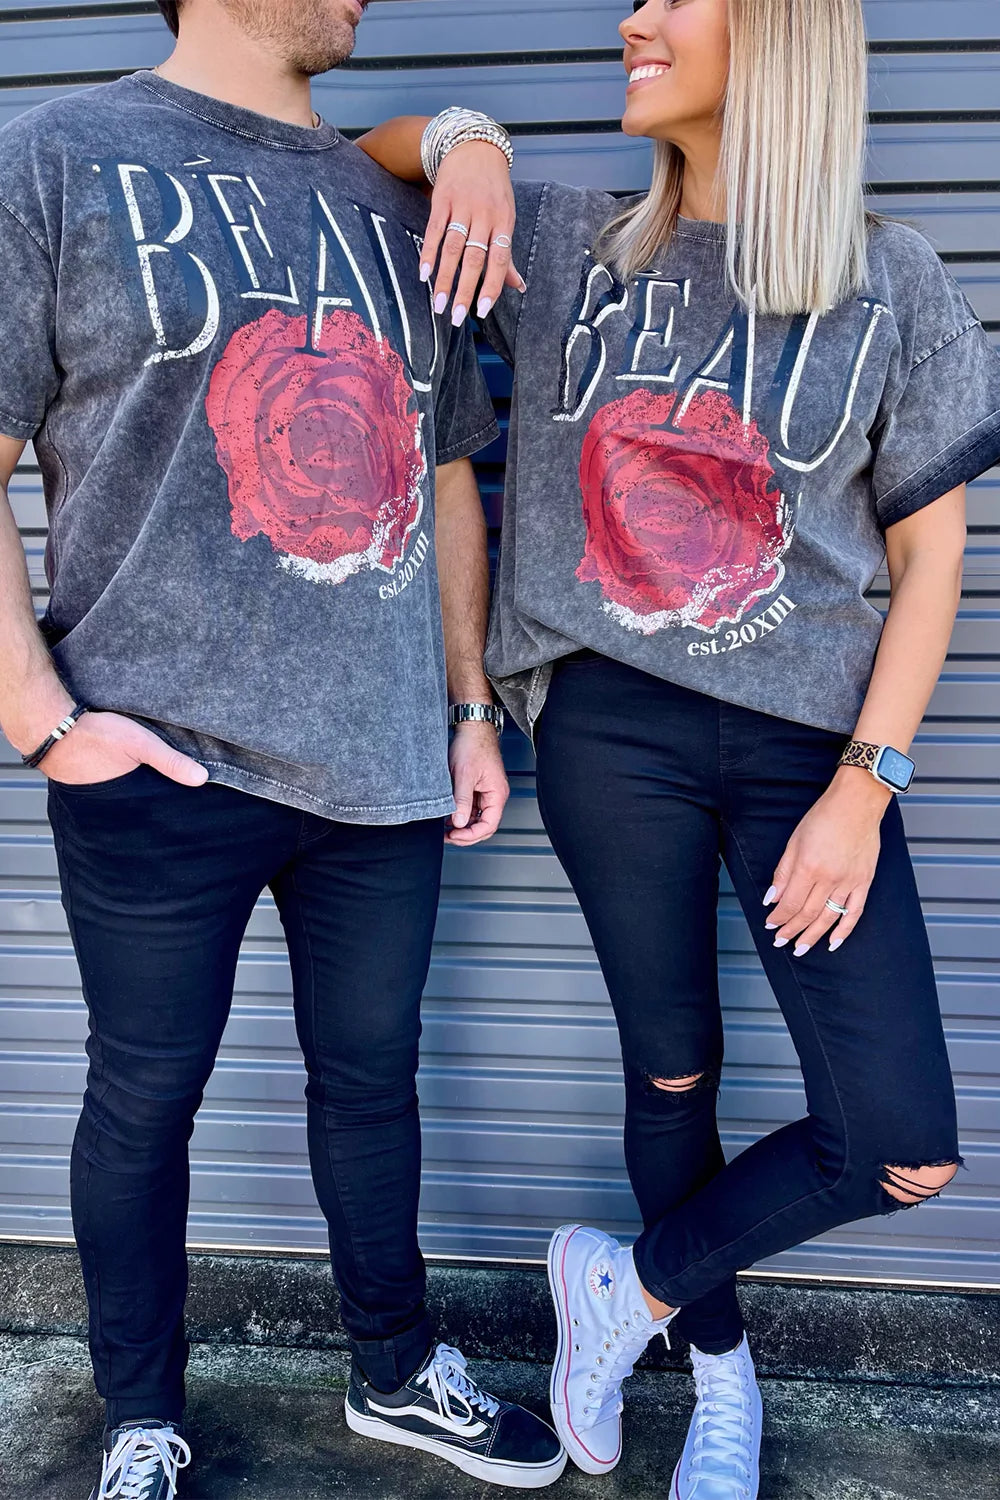 Beau and Roses Tee - Adults